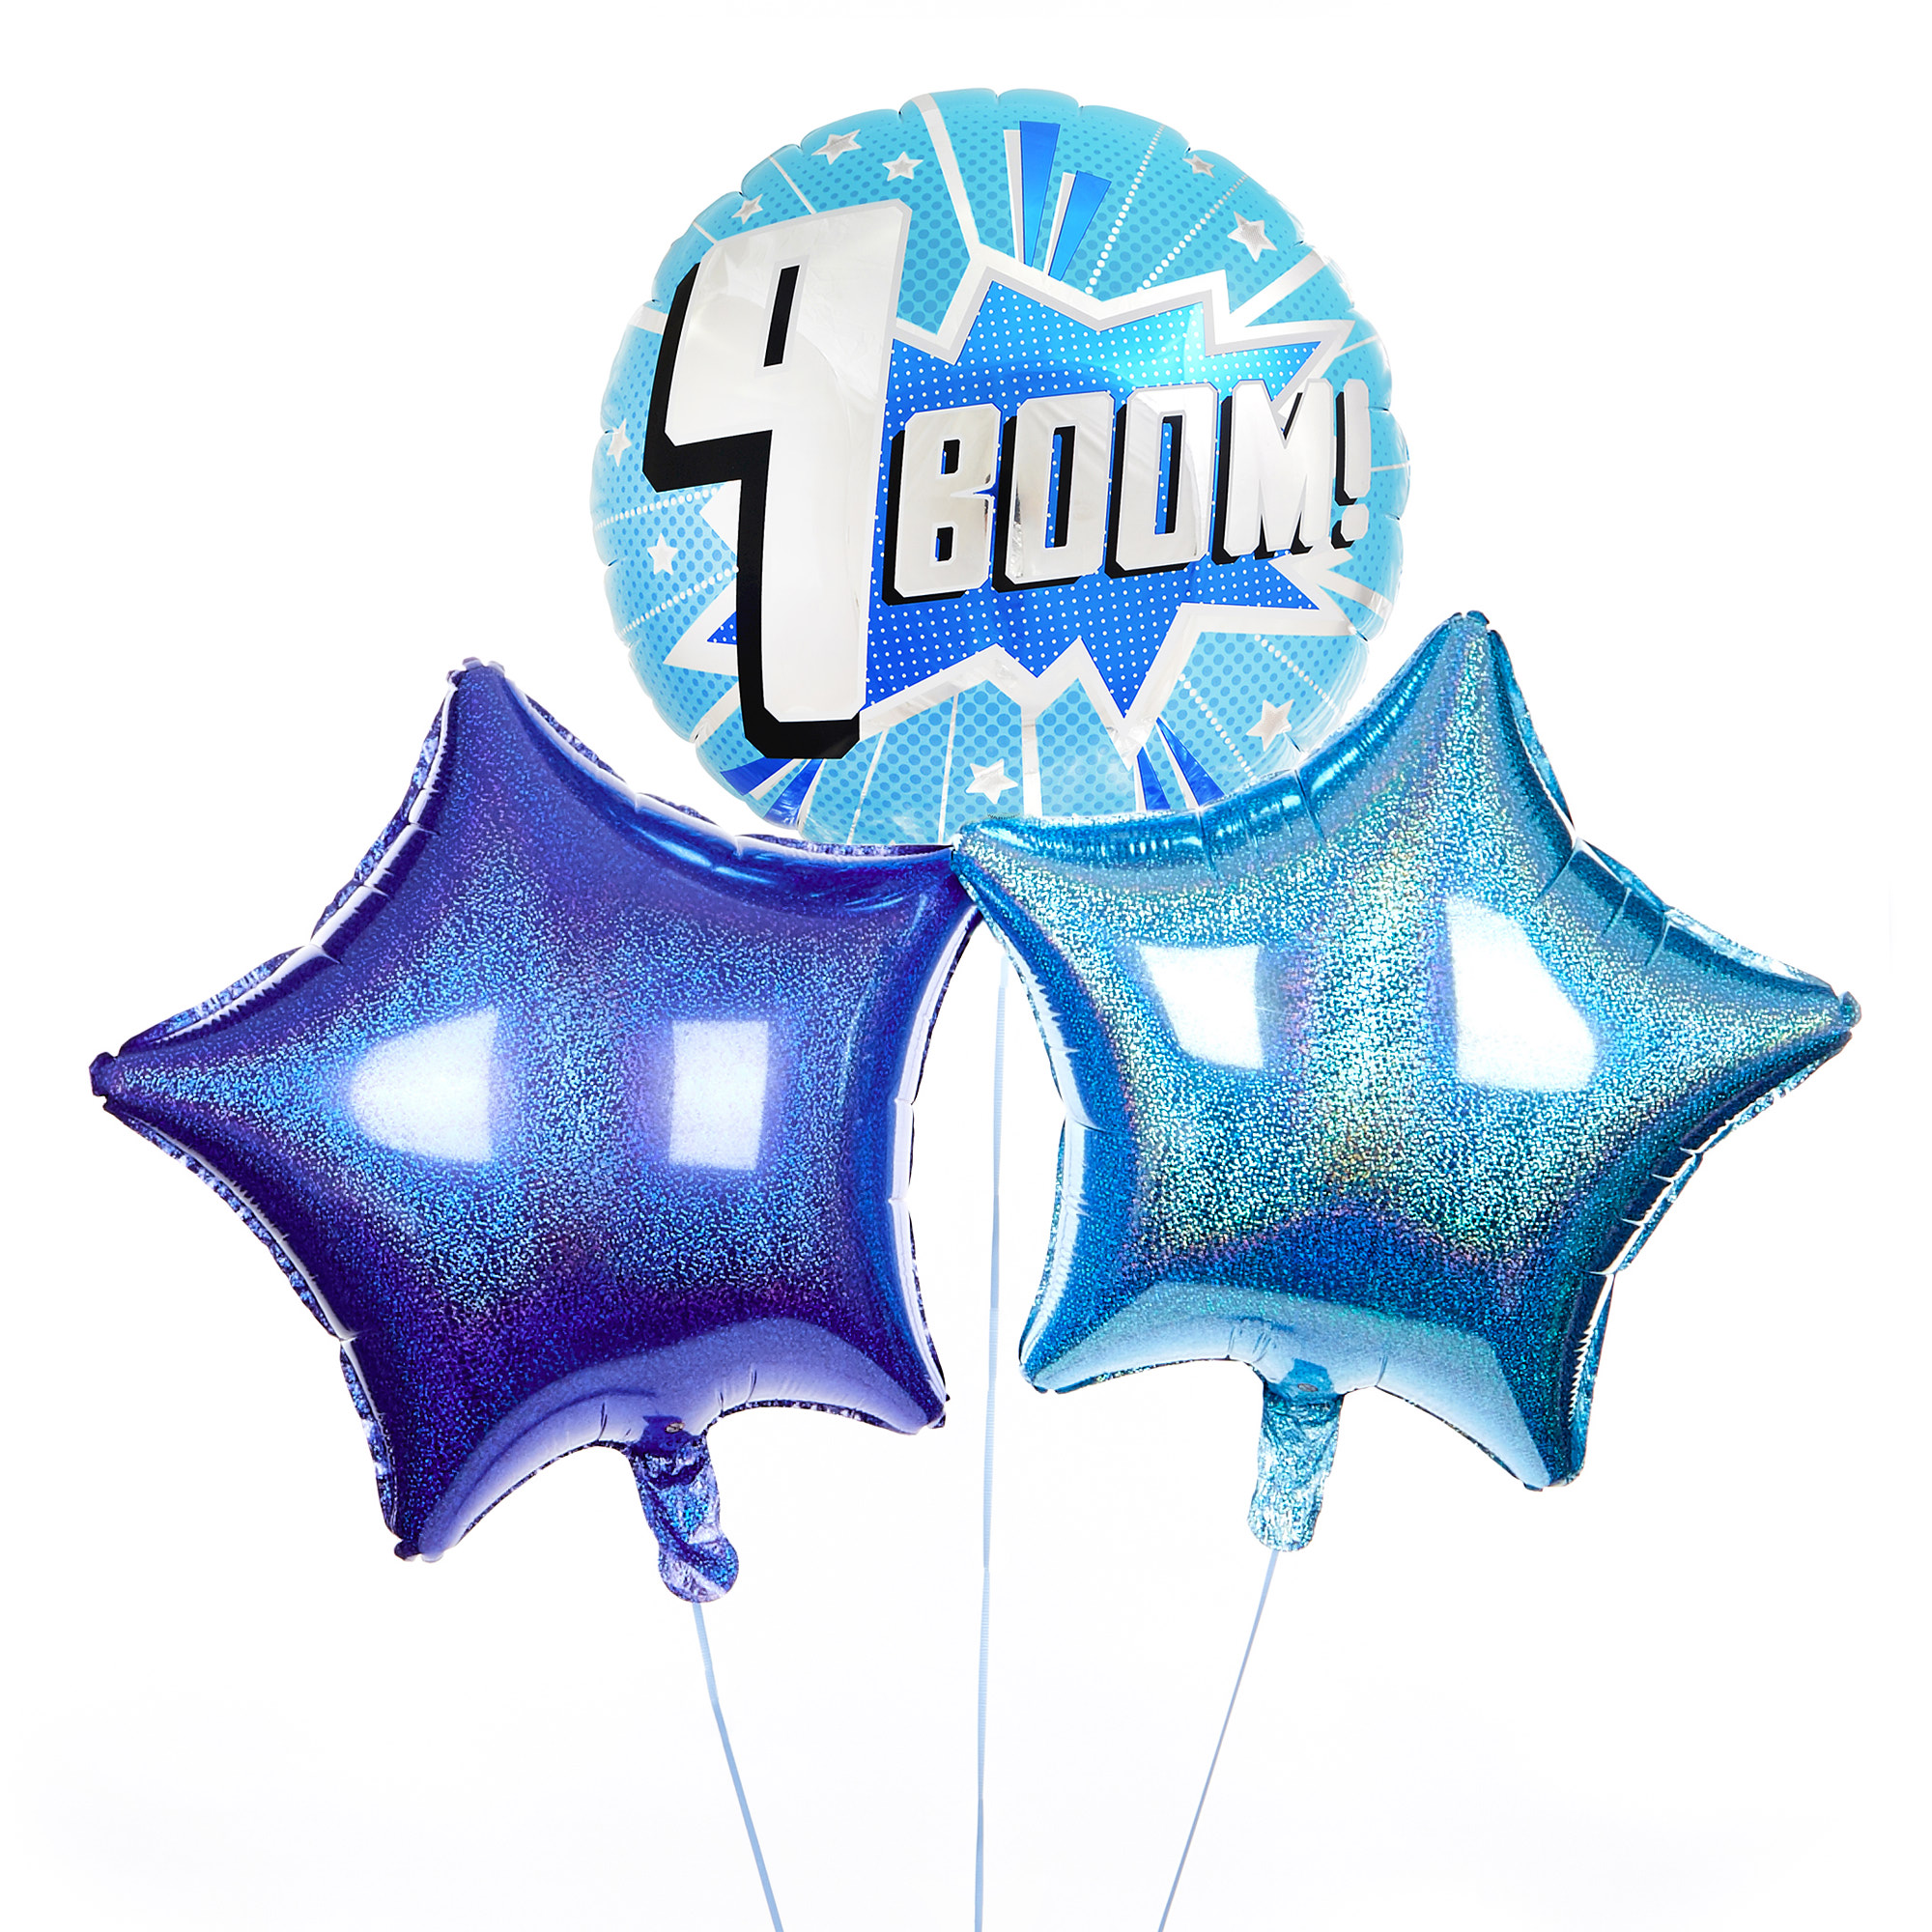 Boom! 9th Birthday Balloon Bouquet - DELIVERED INFLATED!